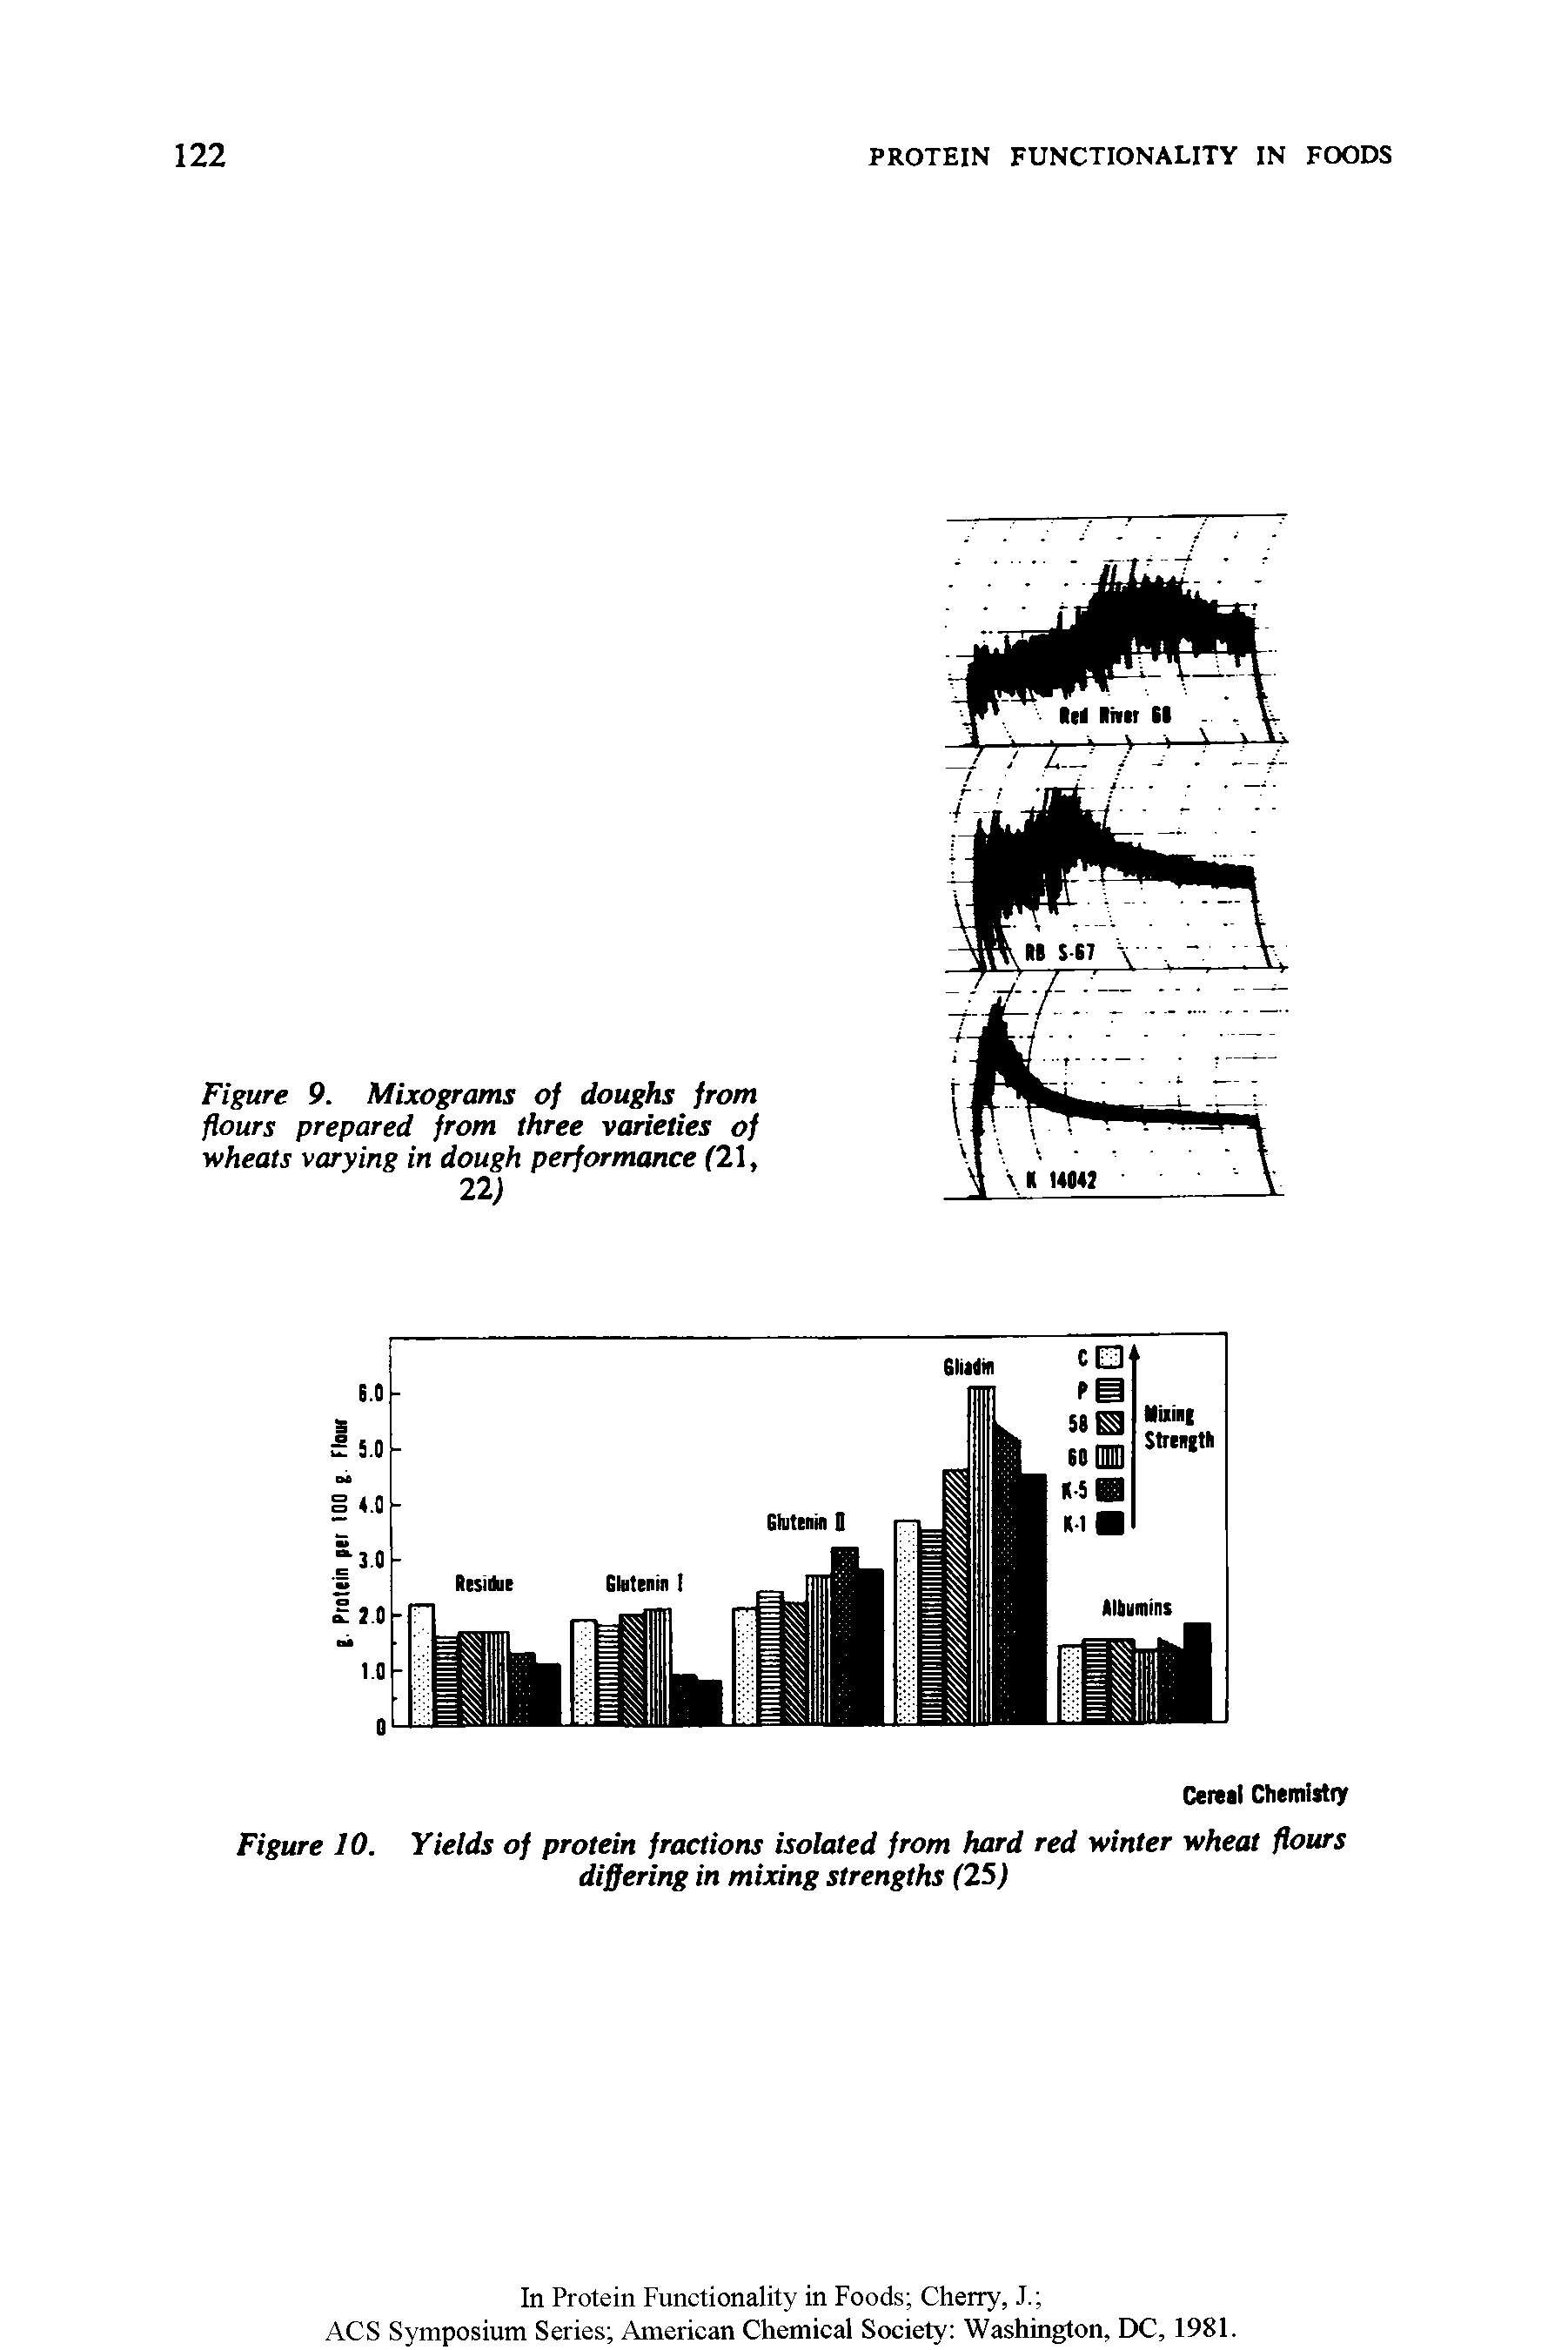 Figure 9. Mixograms of doughs from flours prepared from three varieties of wheats varying in dough performance (21, 22)...